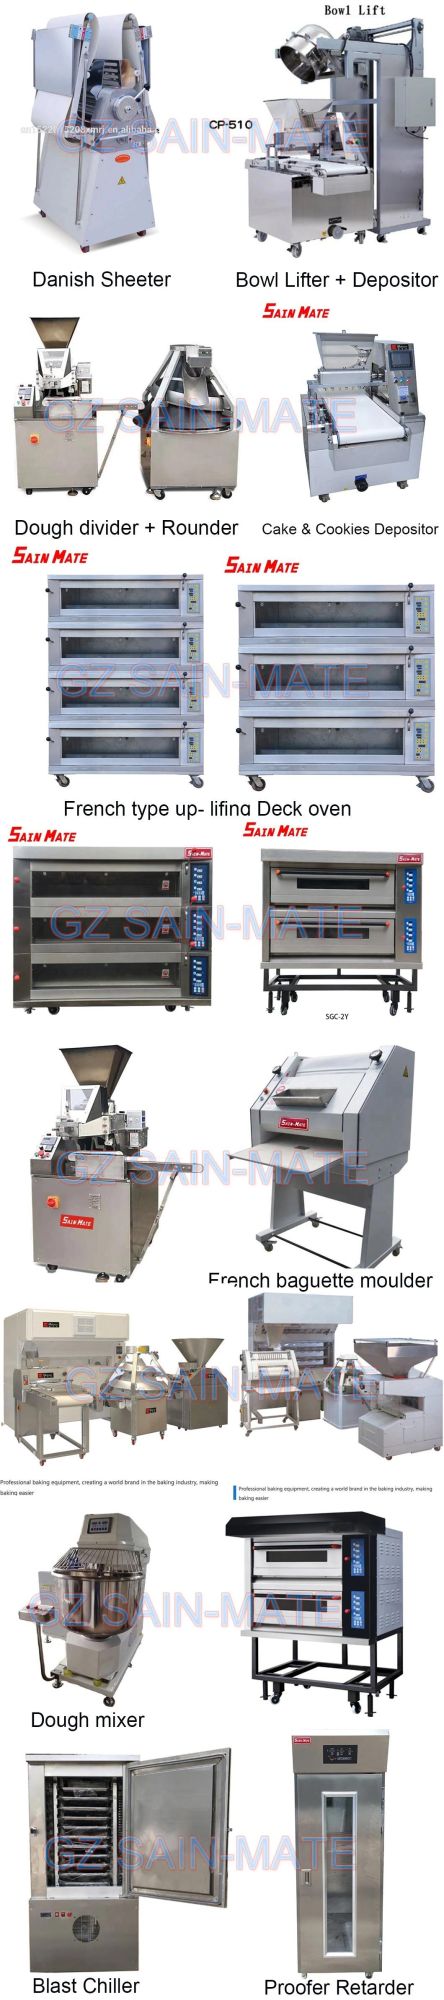 Gas Diesel Electric Industrial Rotary Oven for Bakery Sale Bread Baking, Italy Commercial 12 16 32 64 Trays Rack Rotary Oven Price